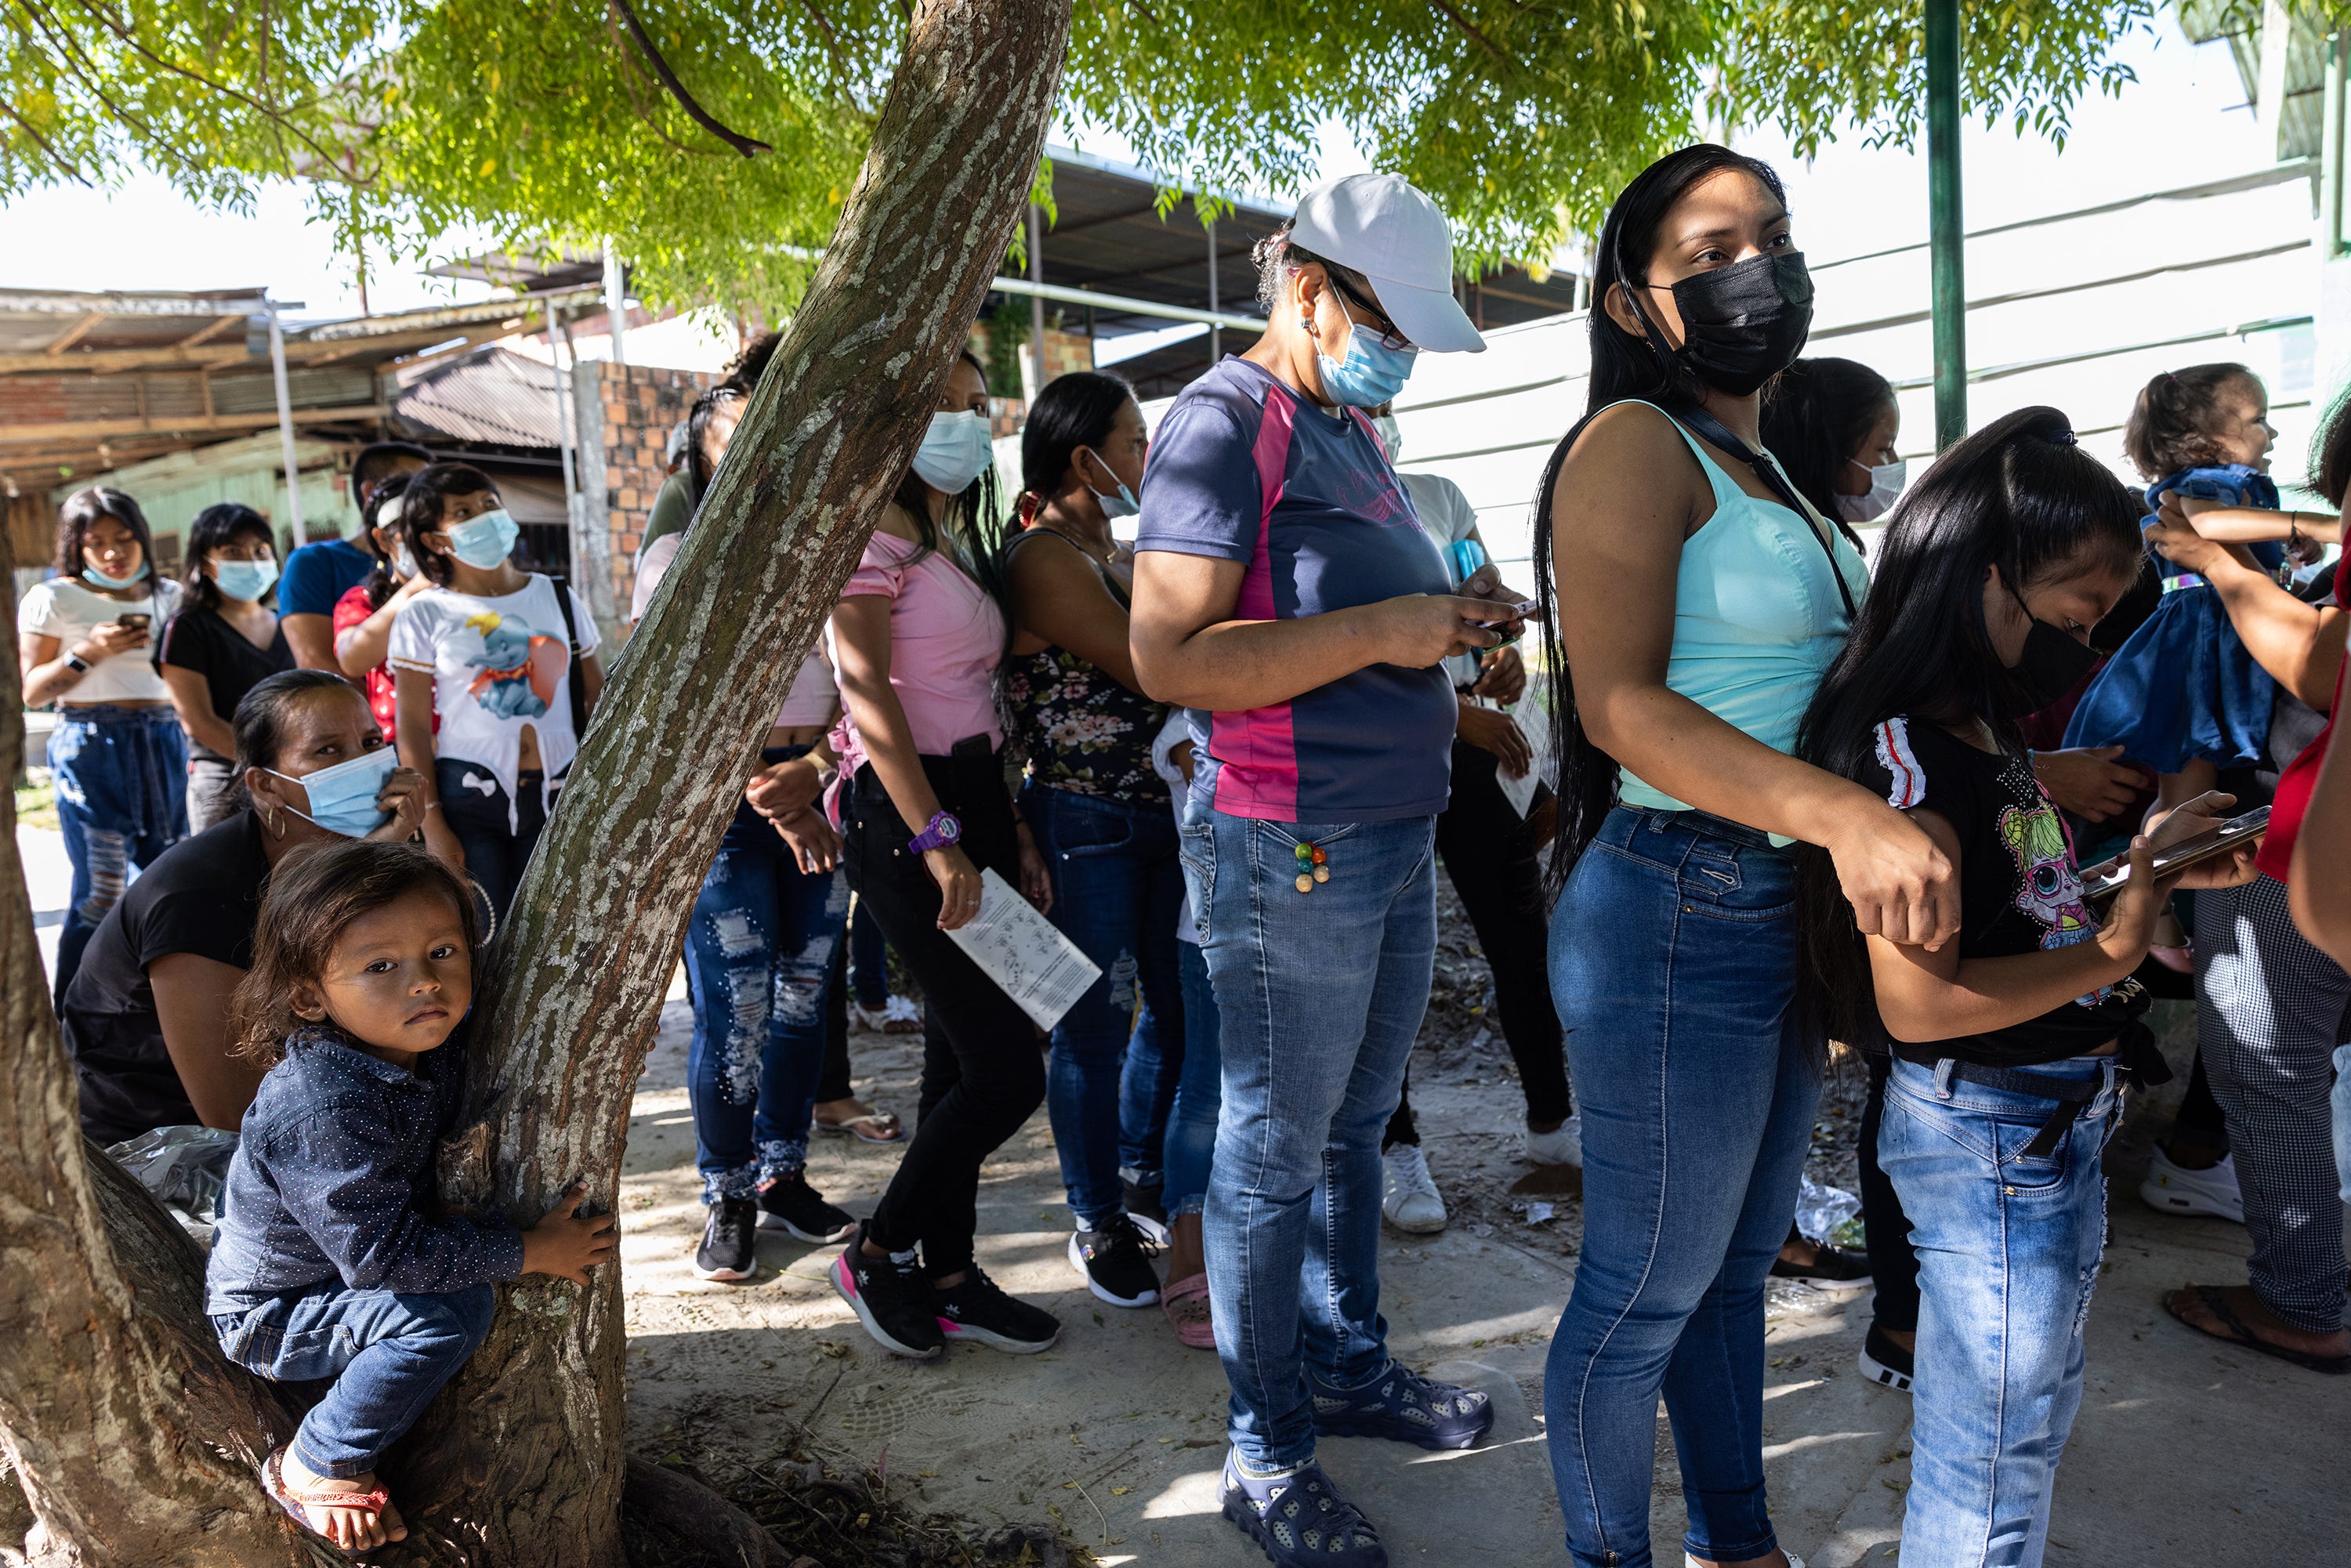 After several days without any vaccine doses available in Leticia, word spread that some doses had arrived. People started arriving at 6 a.m., leading to long lines.